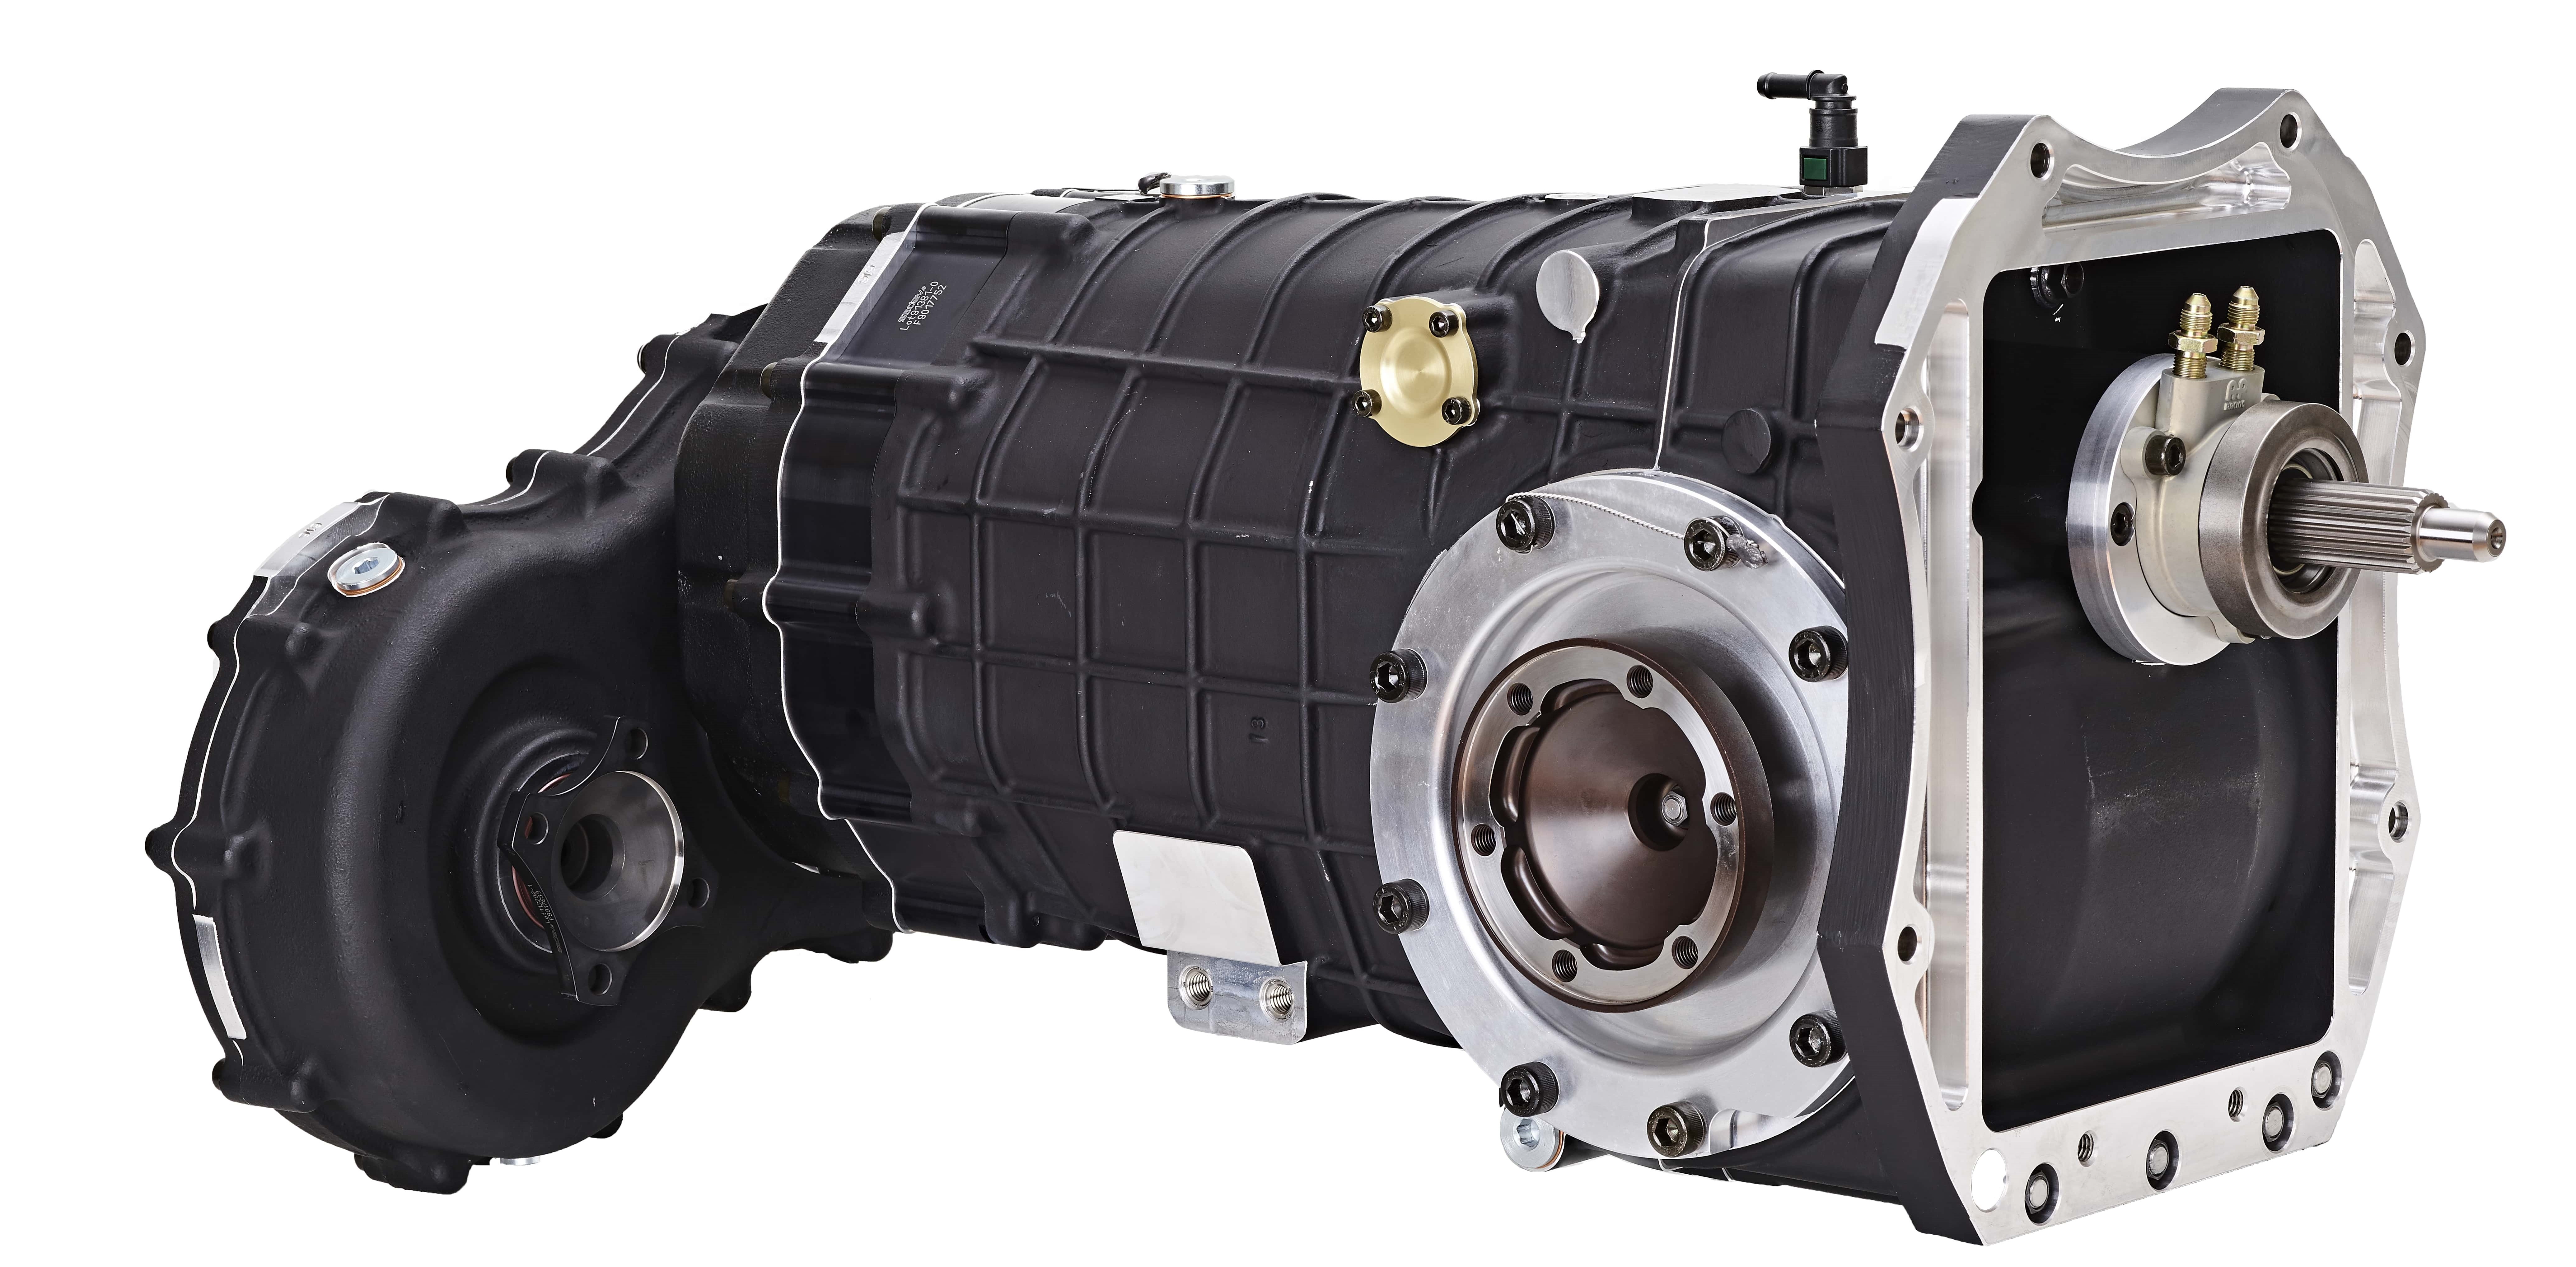 SL90-20 4x4 - gearboxes